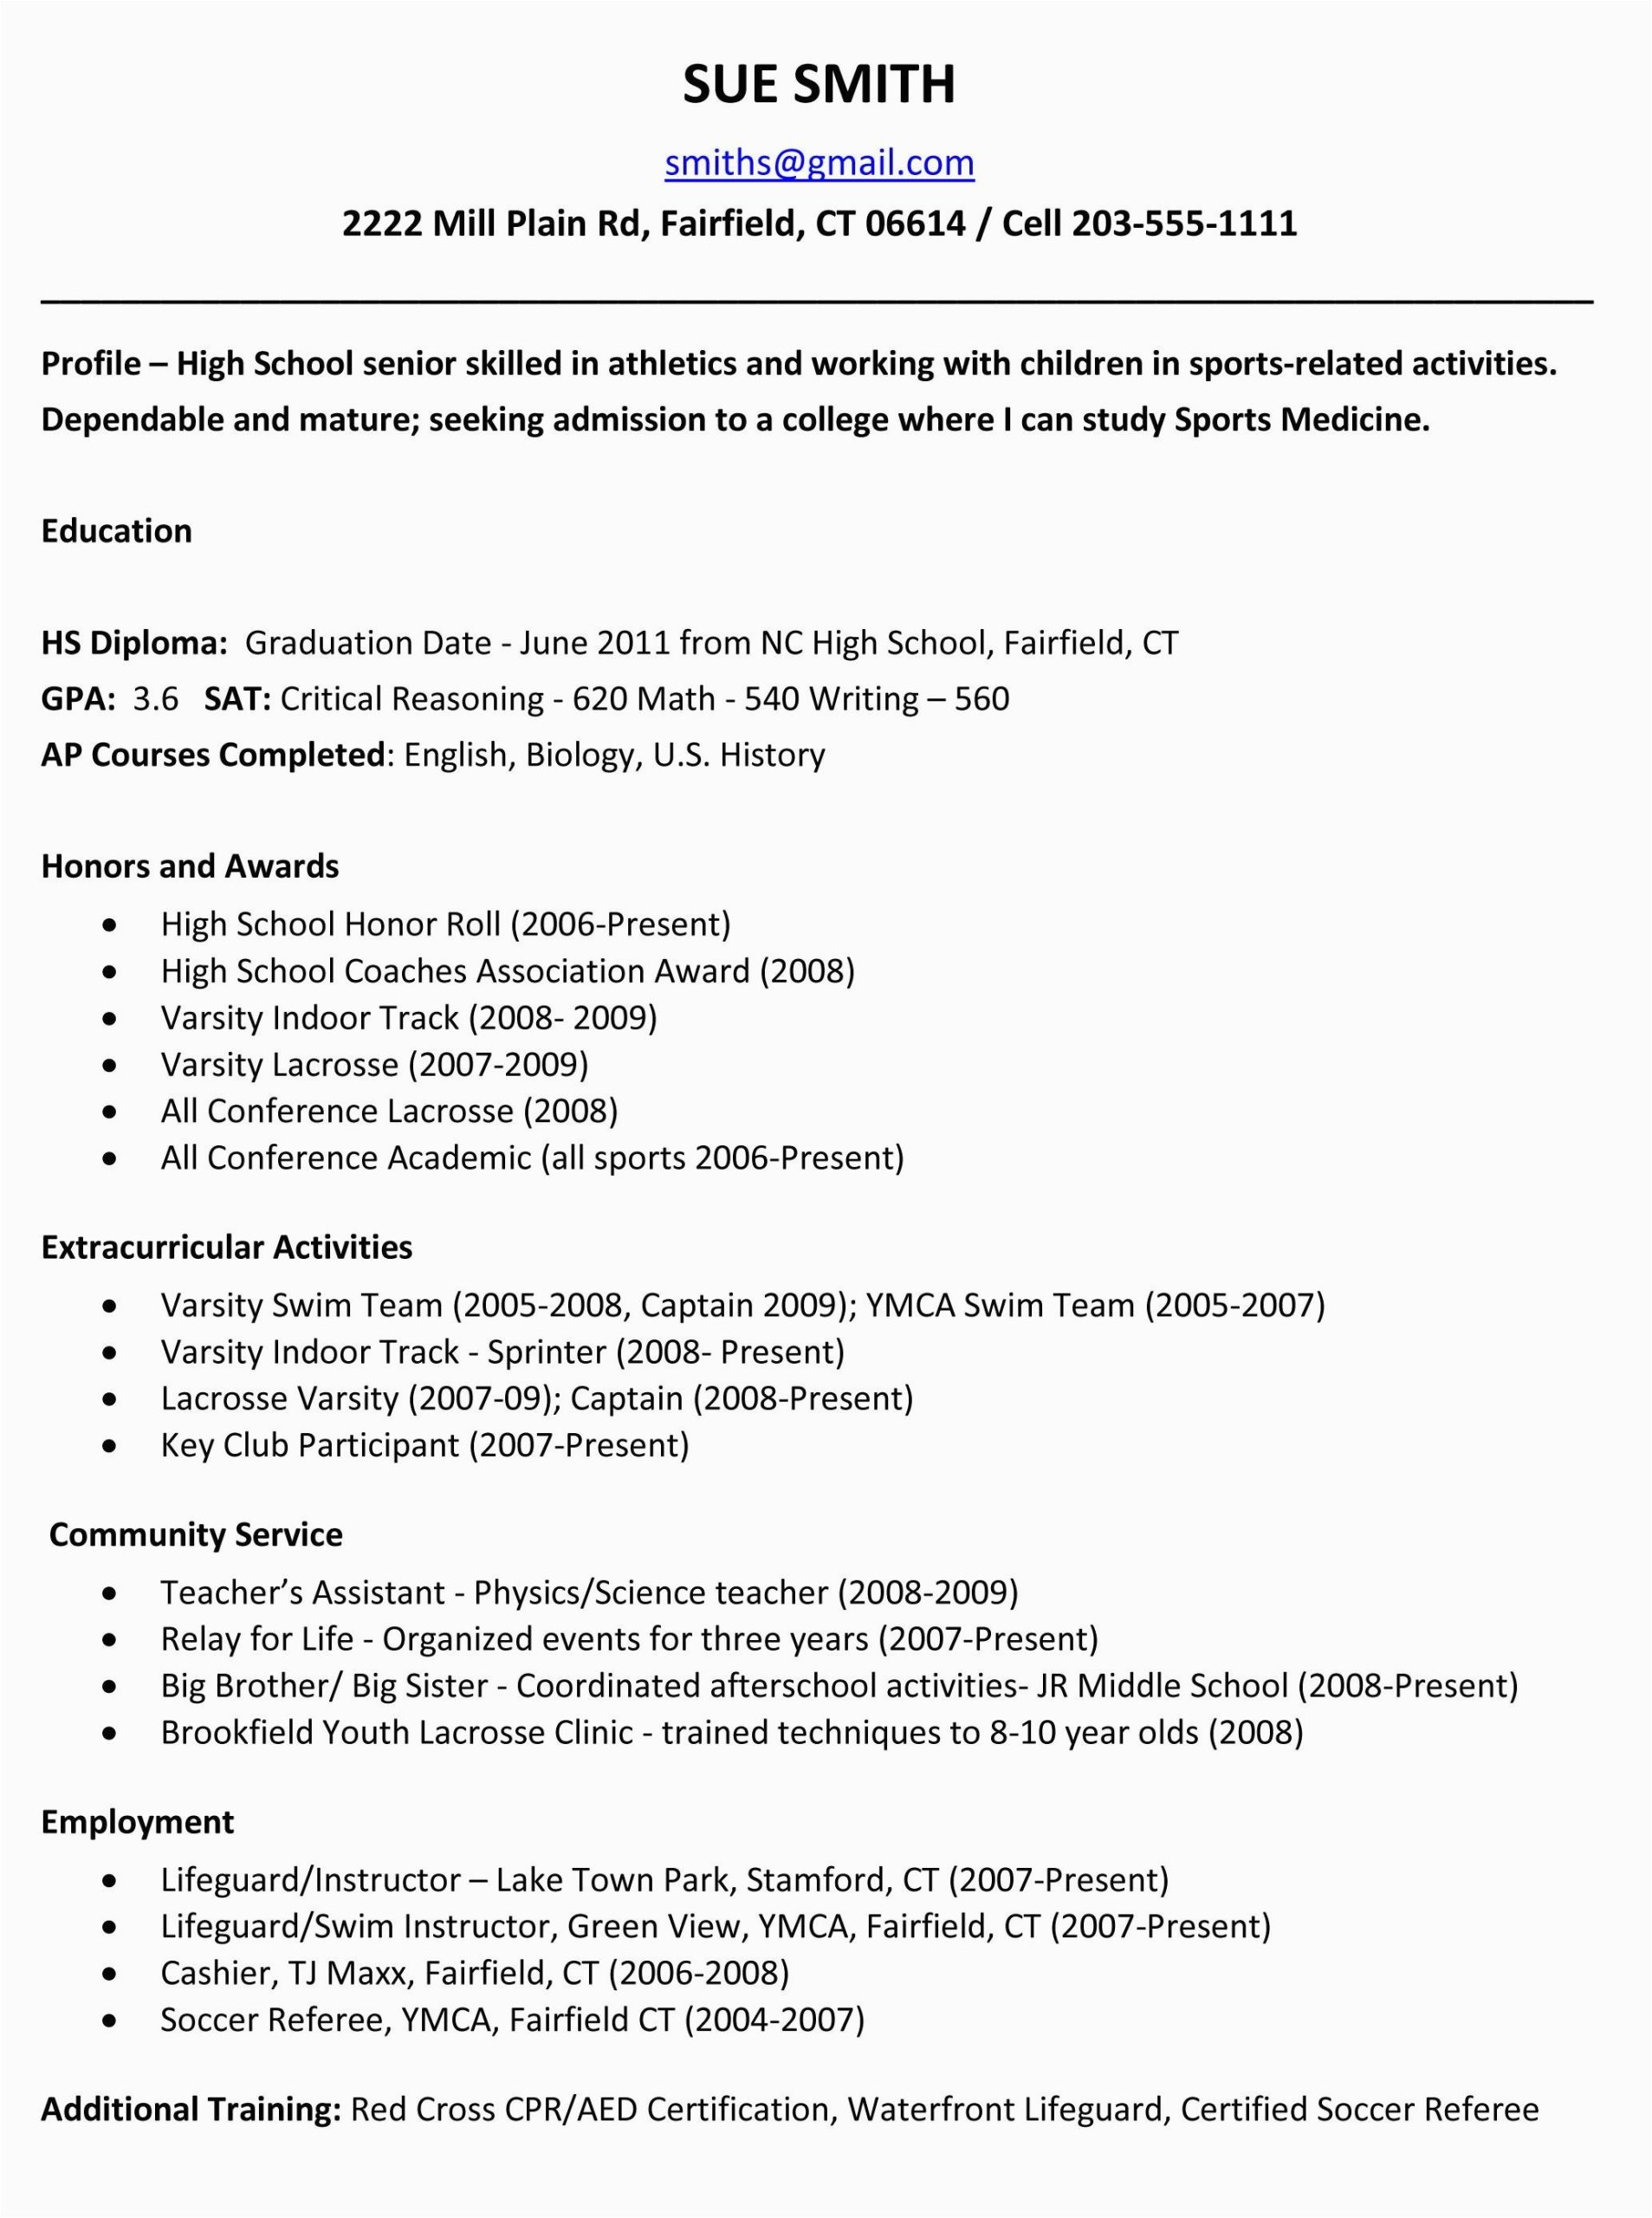 Sample High School Student Resume for College Application Sample Resumes